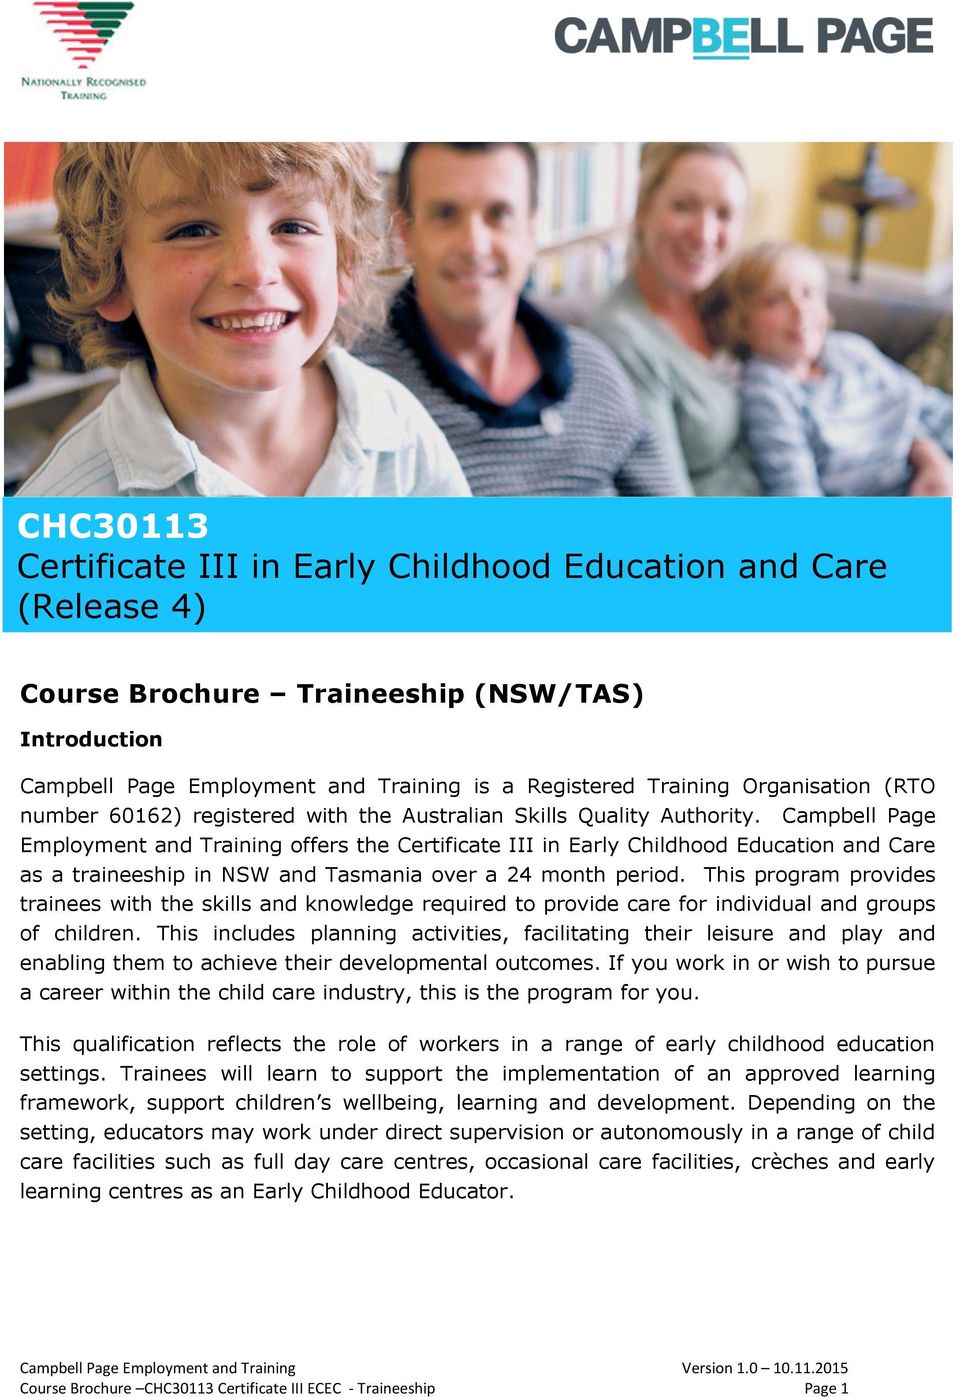 Campbell Page Employment and Training offers the Certificate III in Early Childhood Education and Care as a traineeship in NSW and Tasmania over a 24 month period.